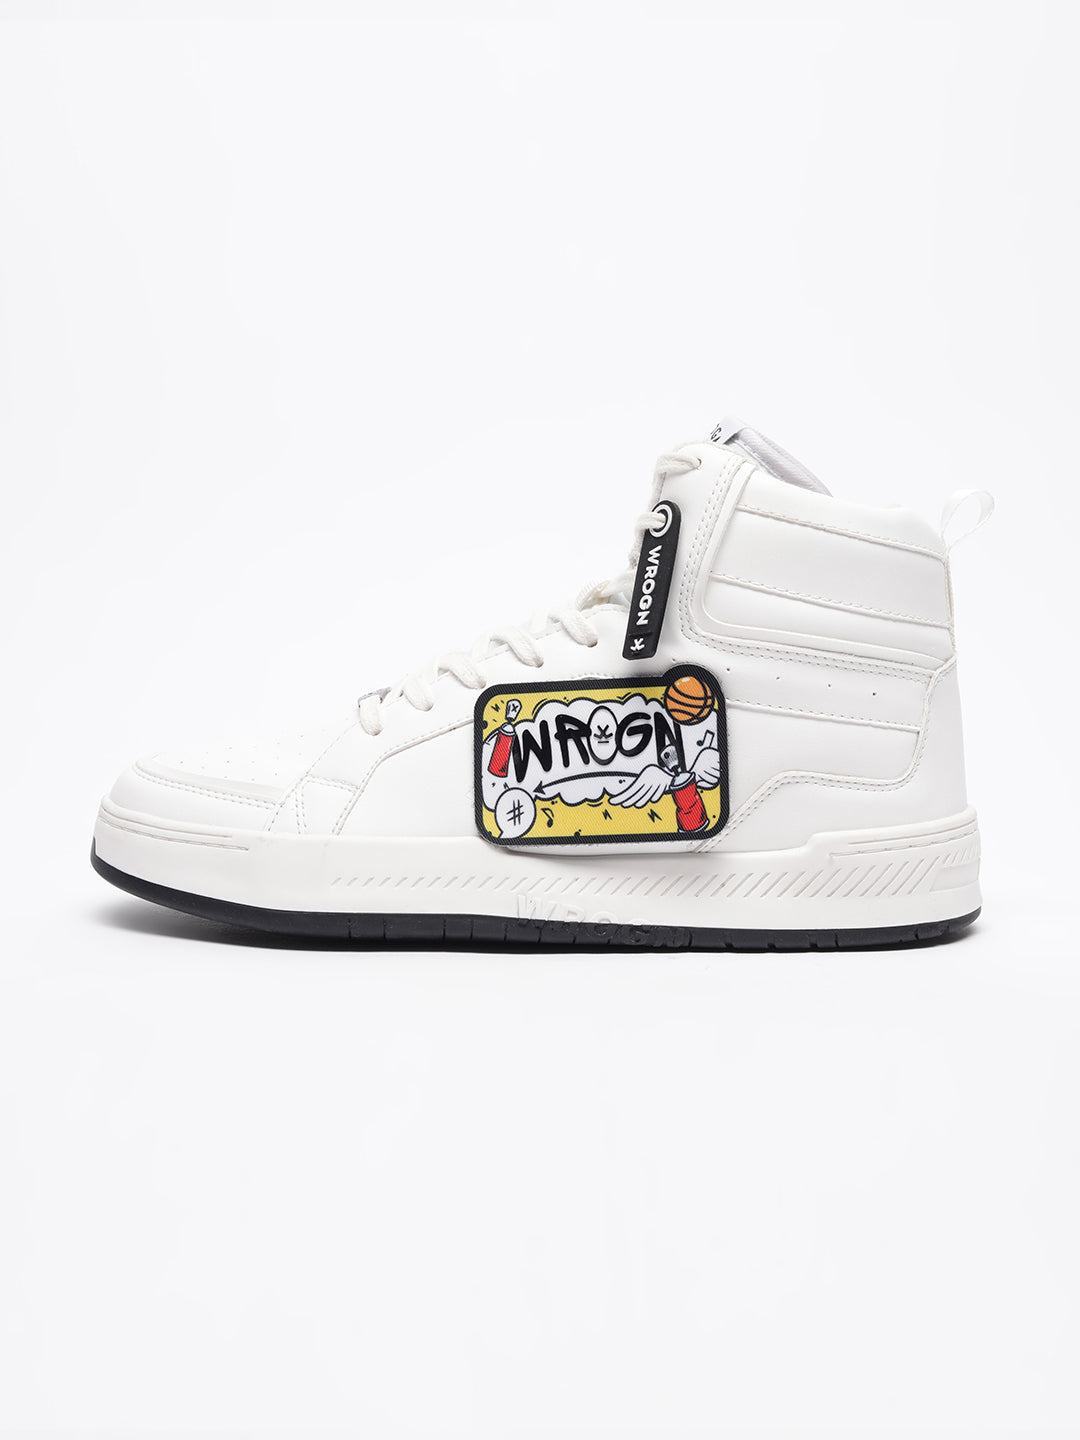 Wrogn Patch High Top Sneakers